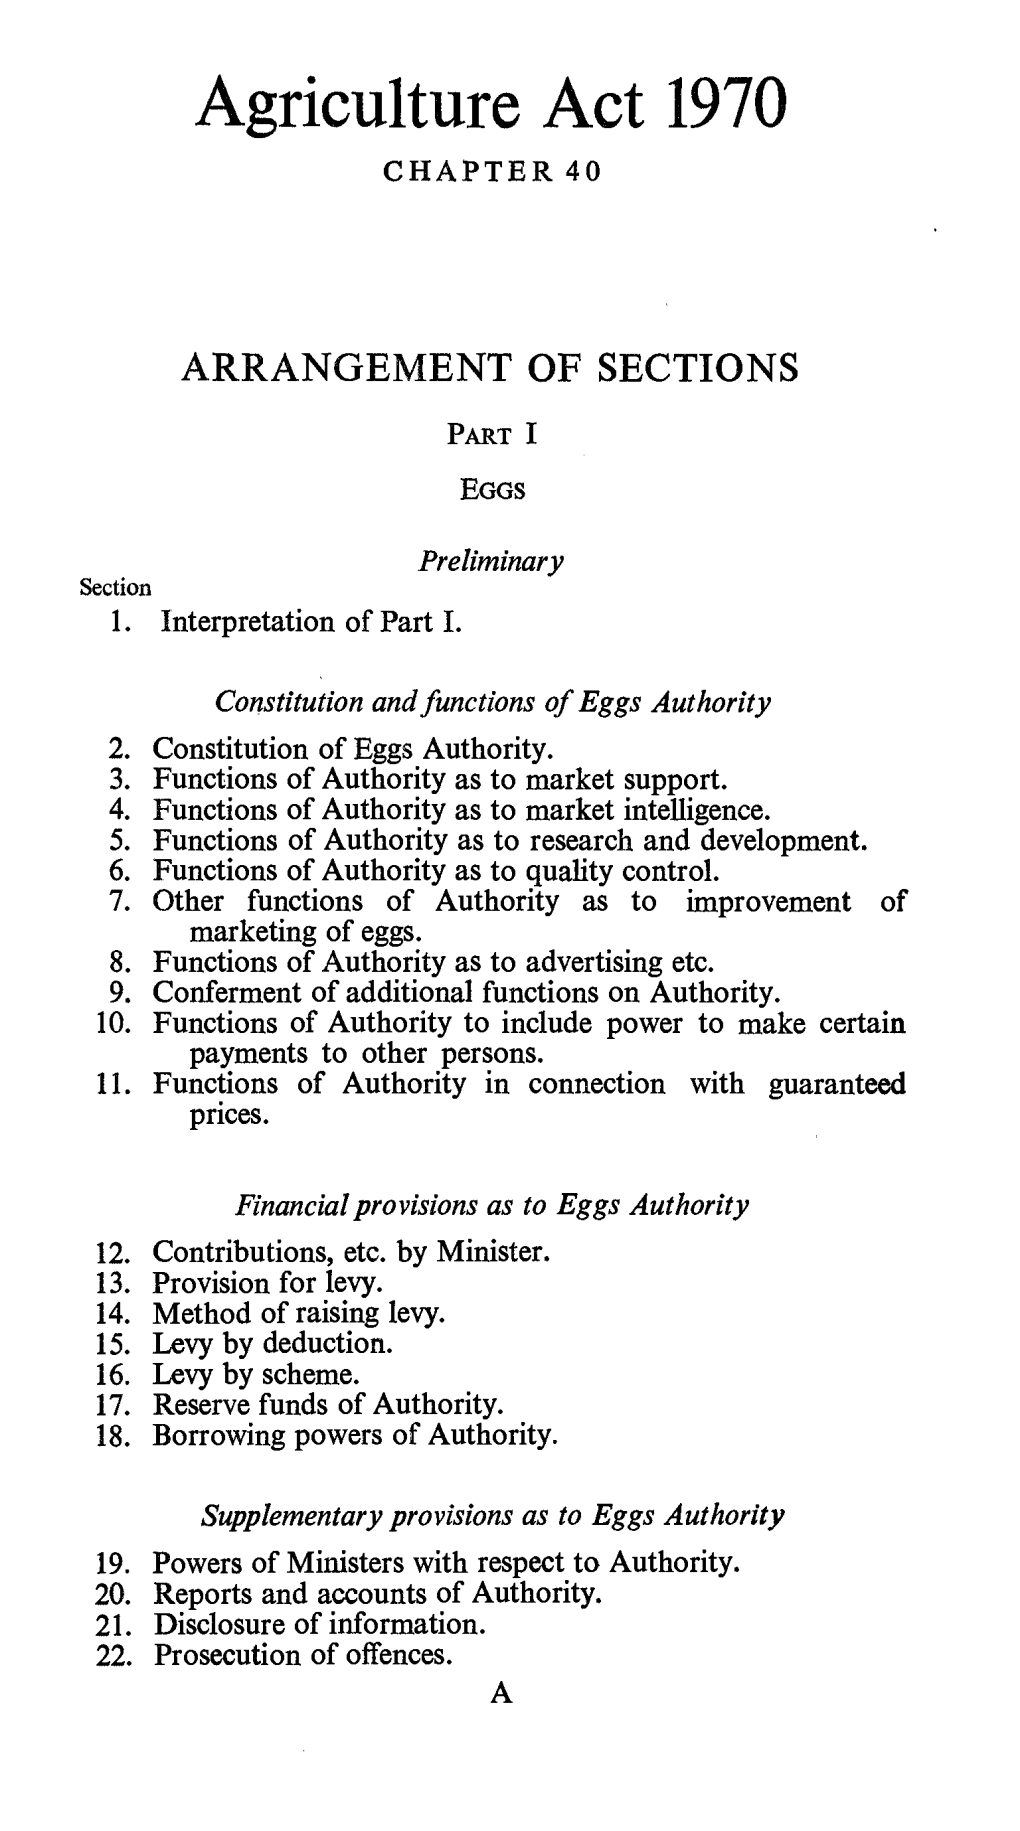 Agriculture Act 1970 CHAPTER 40